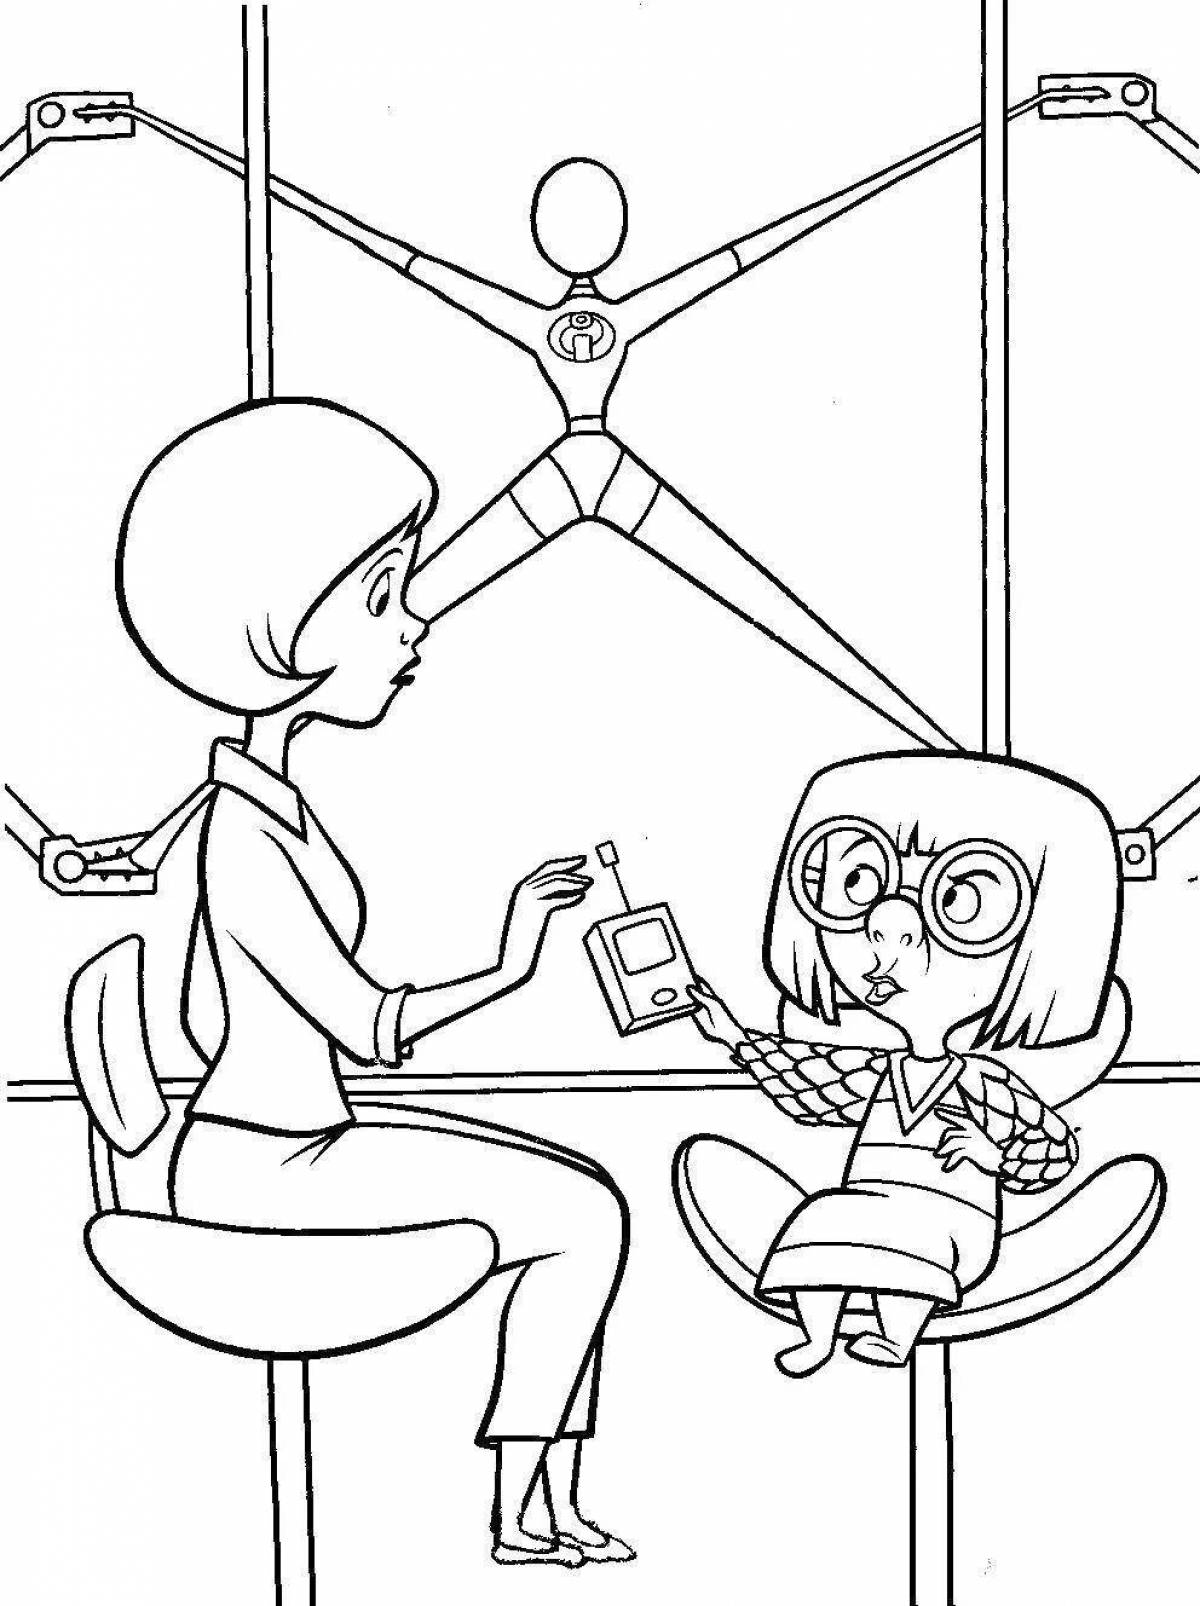 Great Incredibles coloring book for kids